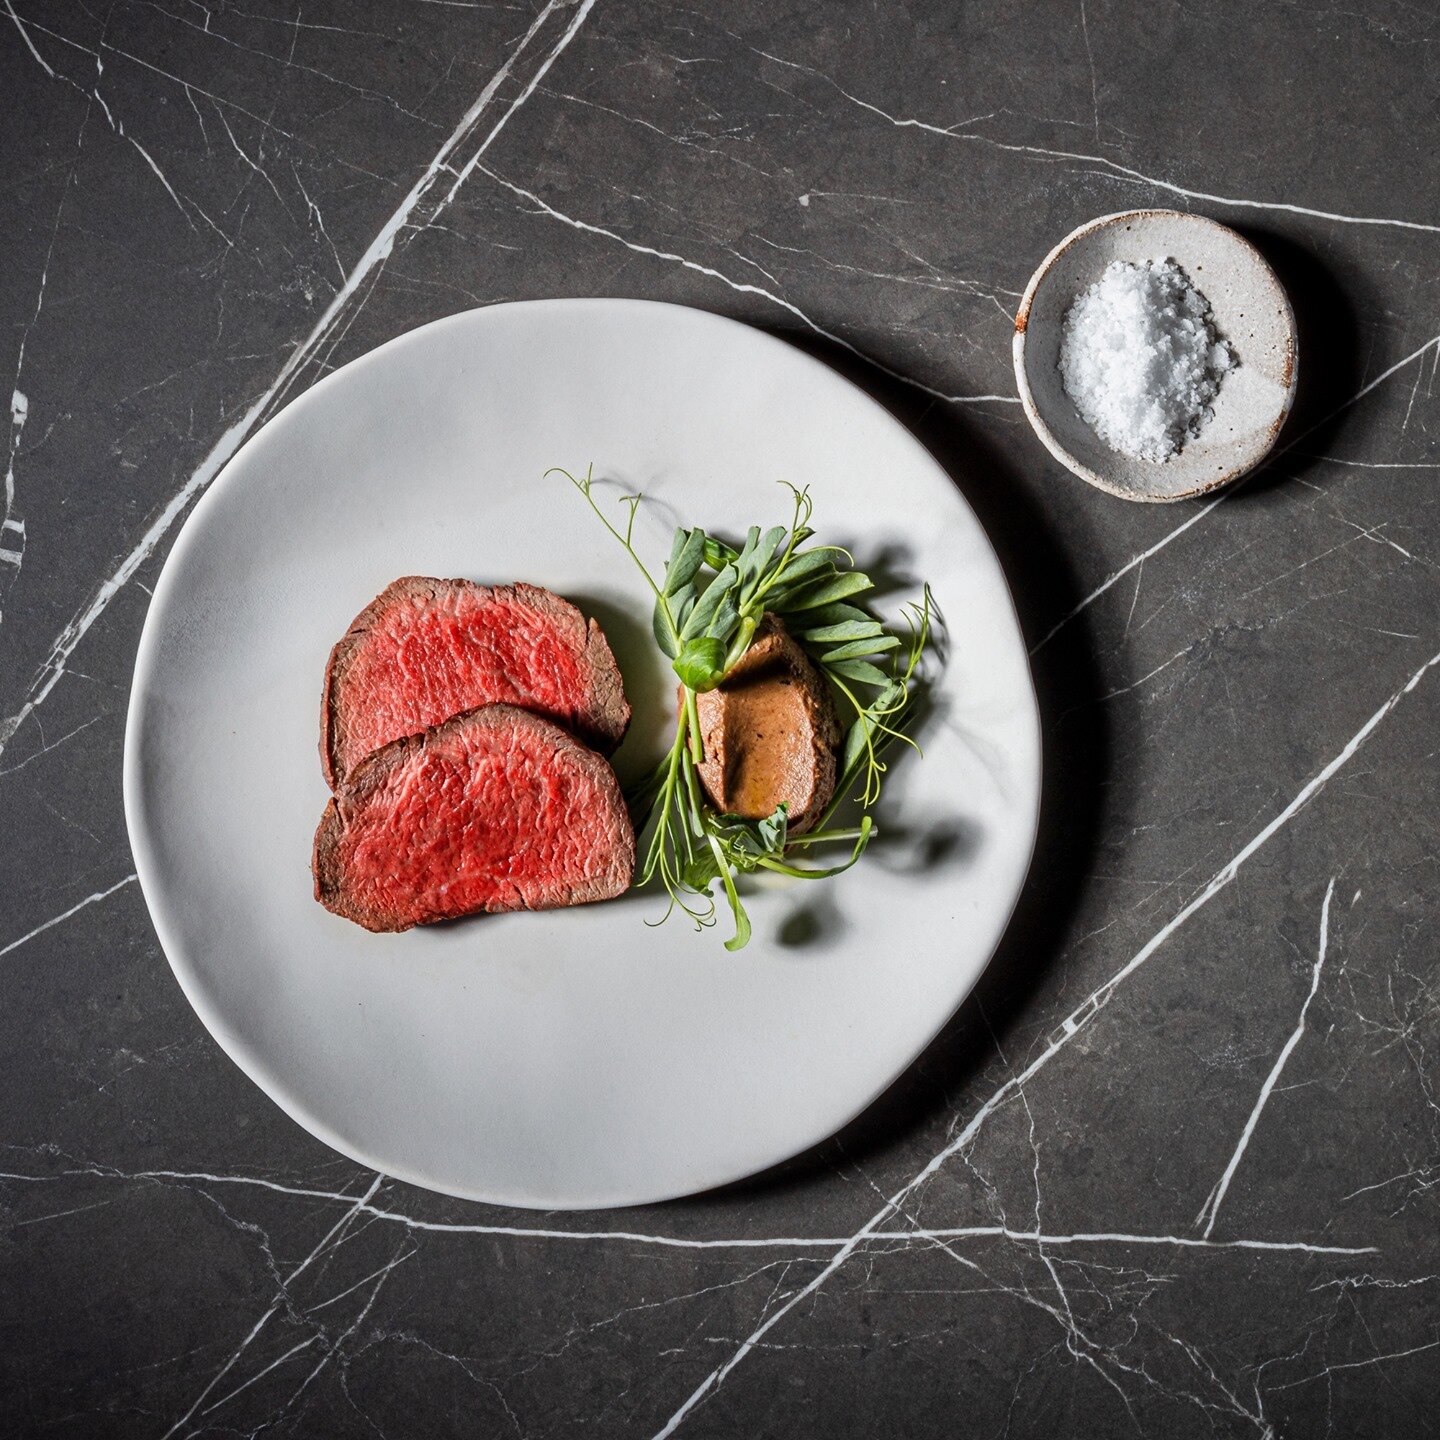 PURE &bull; Stone Axe Original Full Blood Wagyu is of the highest possible quality, free from artificial growth hormones and fed quality produce grown by Australian farmers. Purity, from pasture to plate.